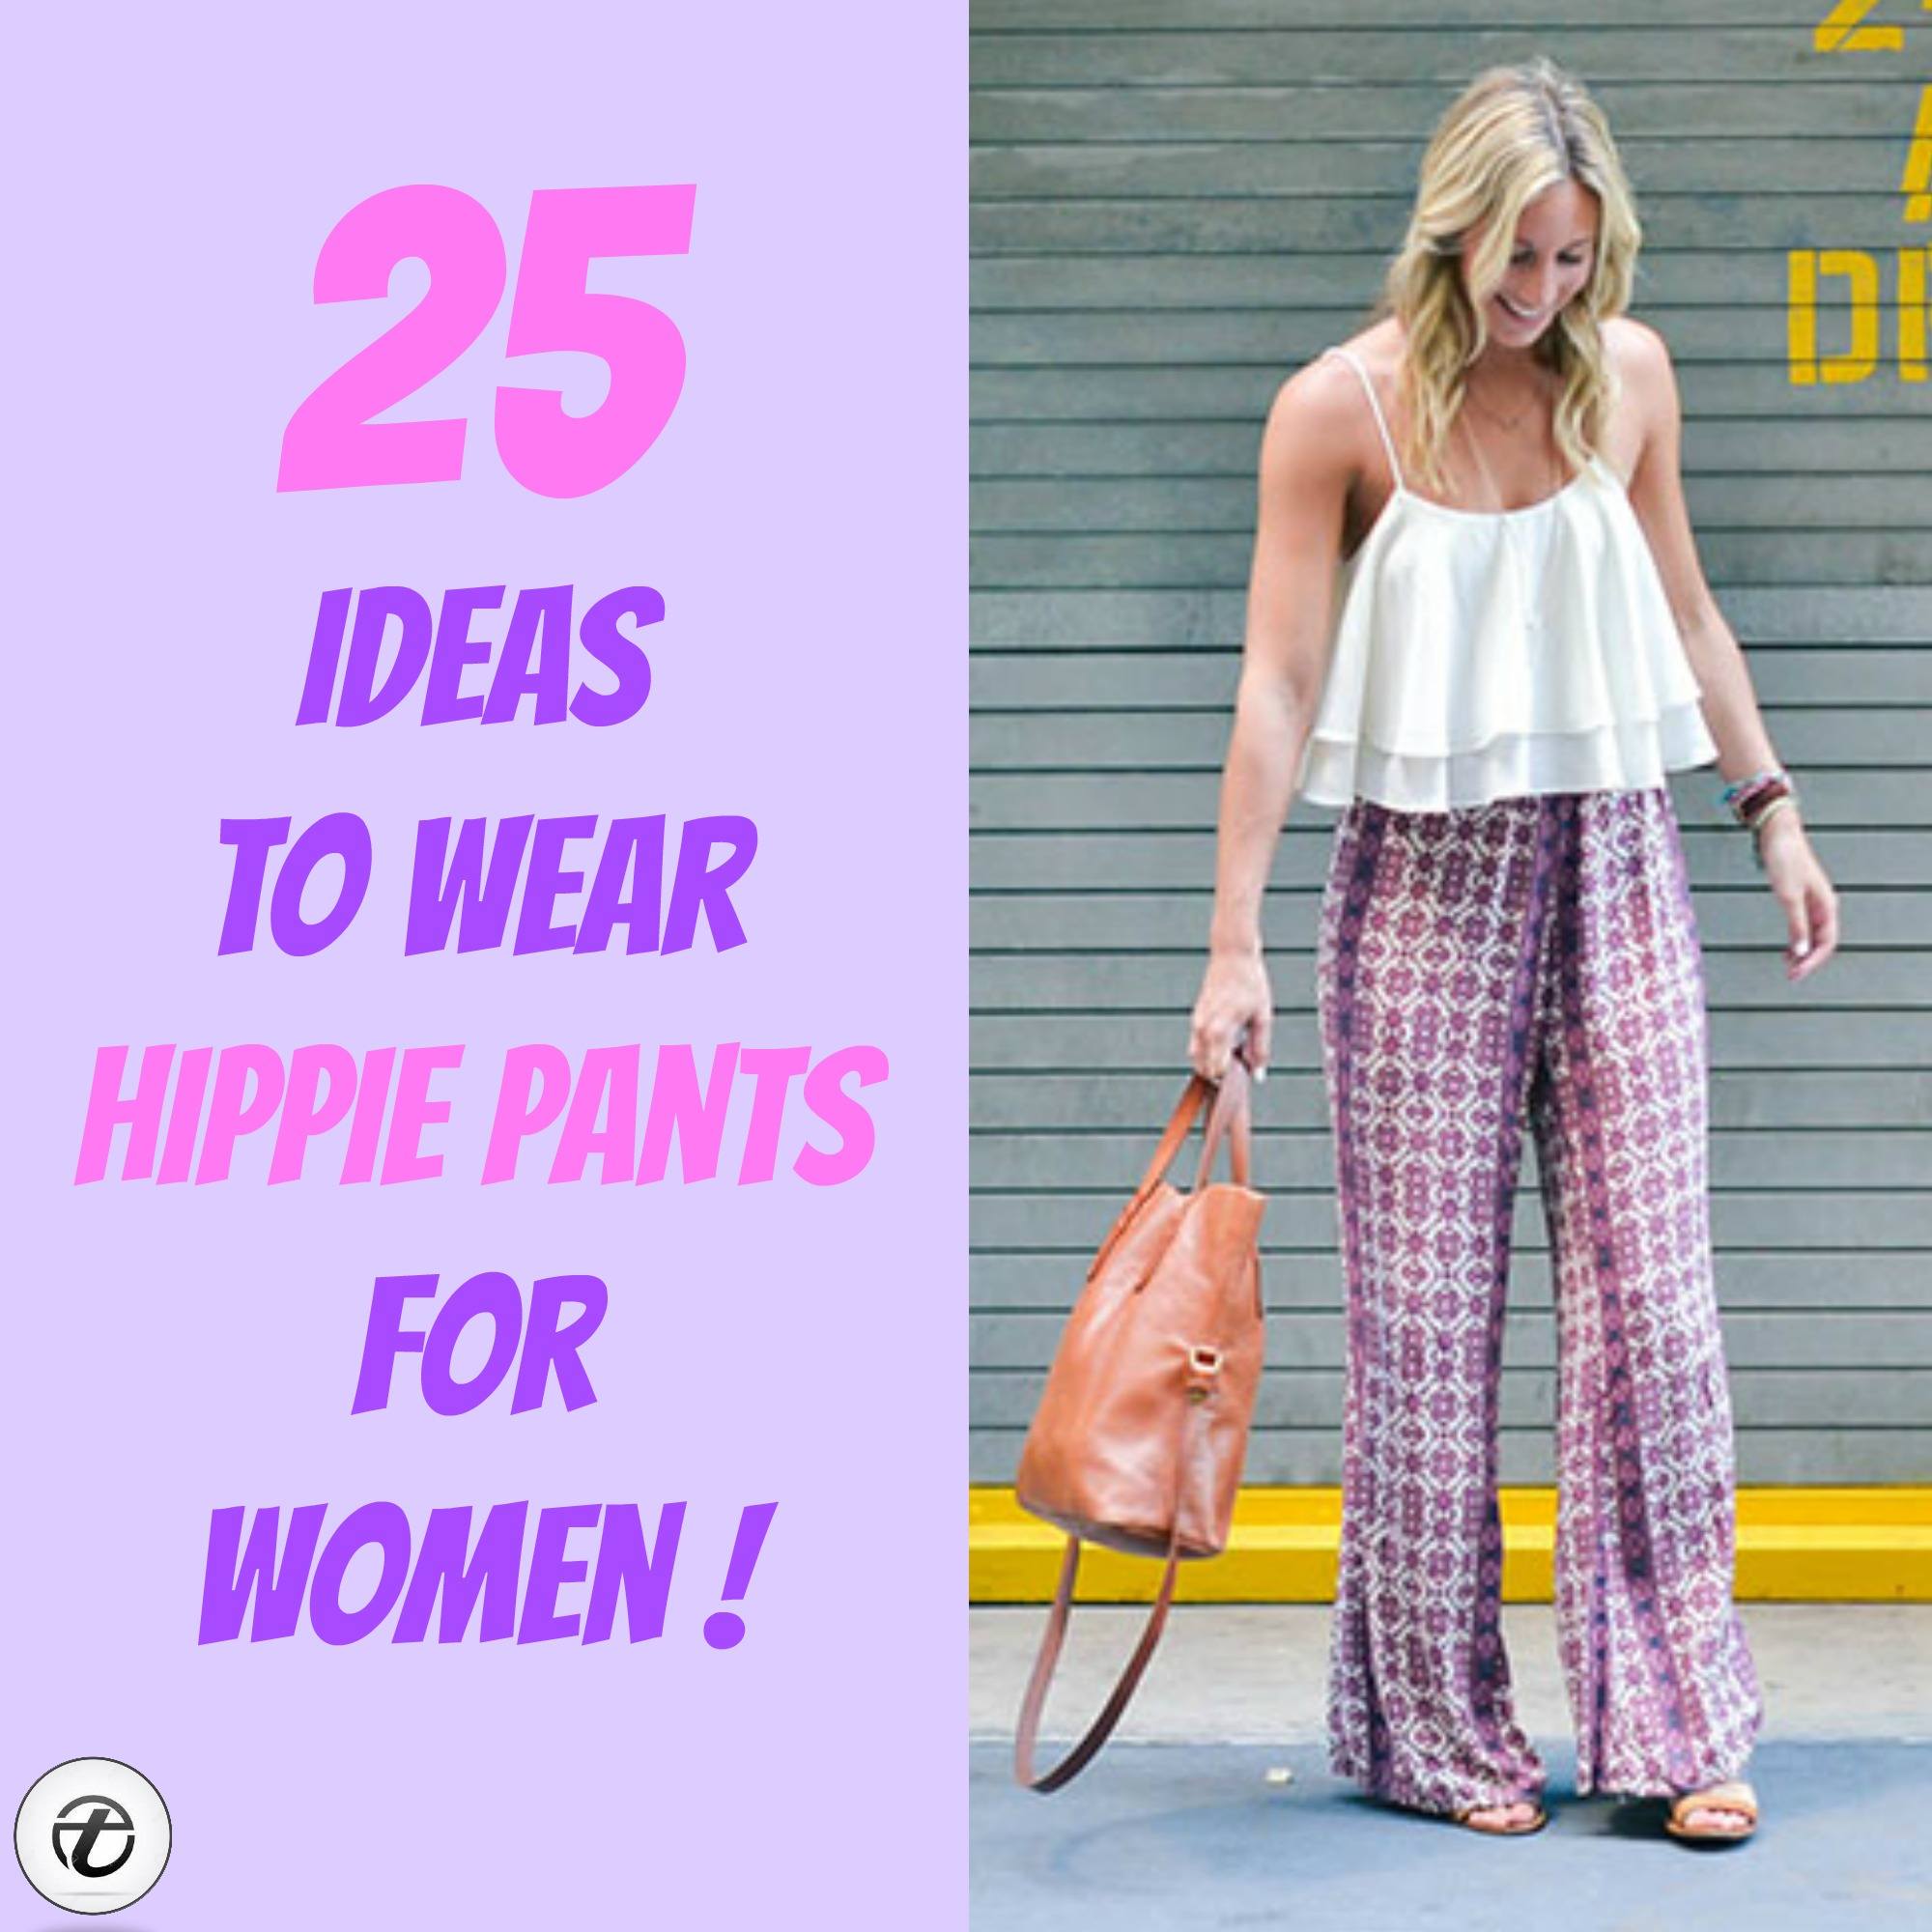 How to Wear Hippie Pants for Women – 25 Outfit Ideas